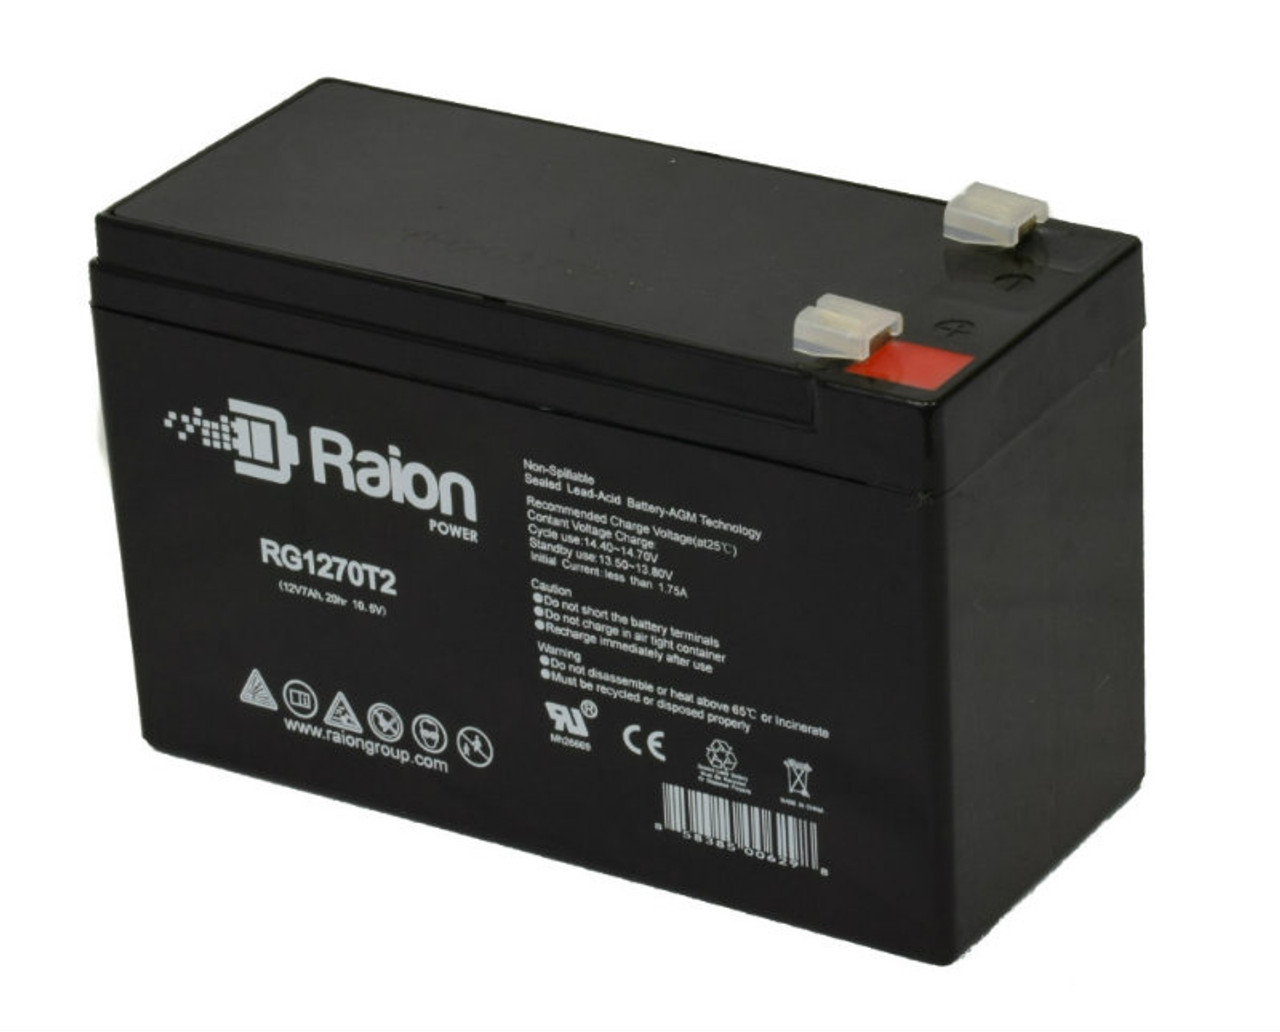 Raion Power Replacement 12V 7Ah RG1270T1 Fire Alarm Battery for ADI 25310